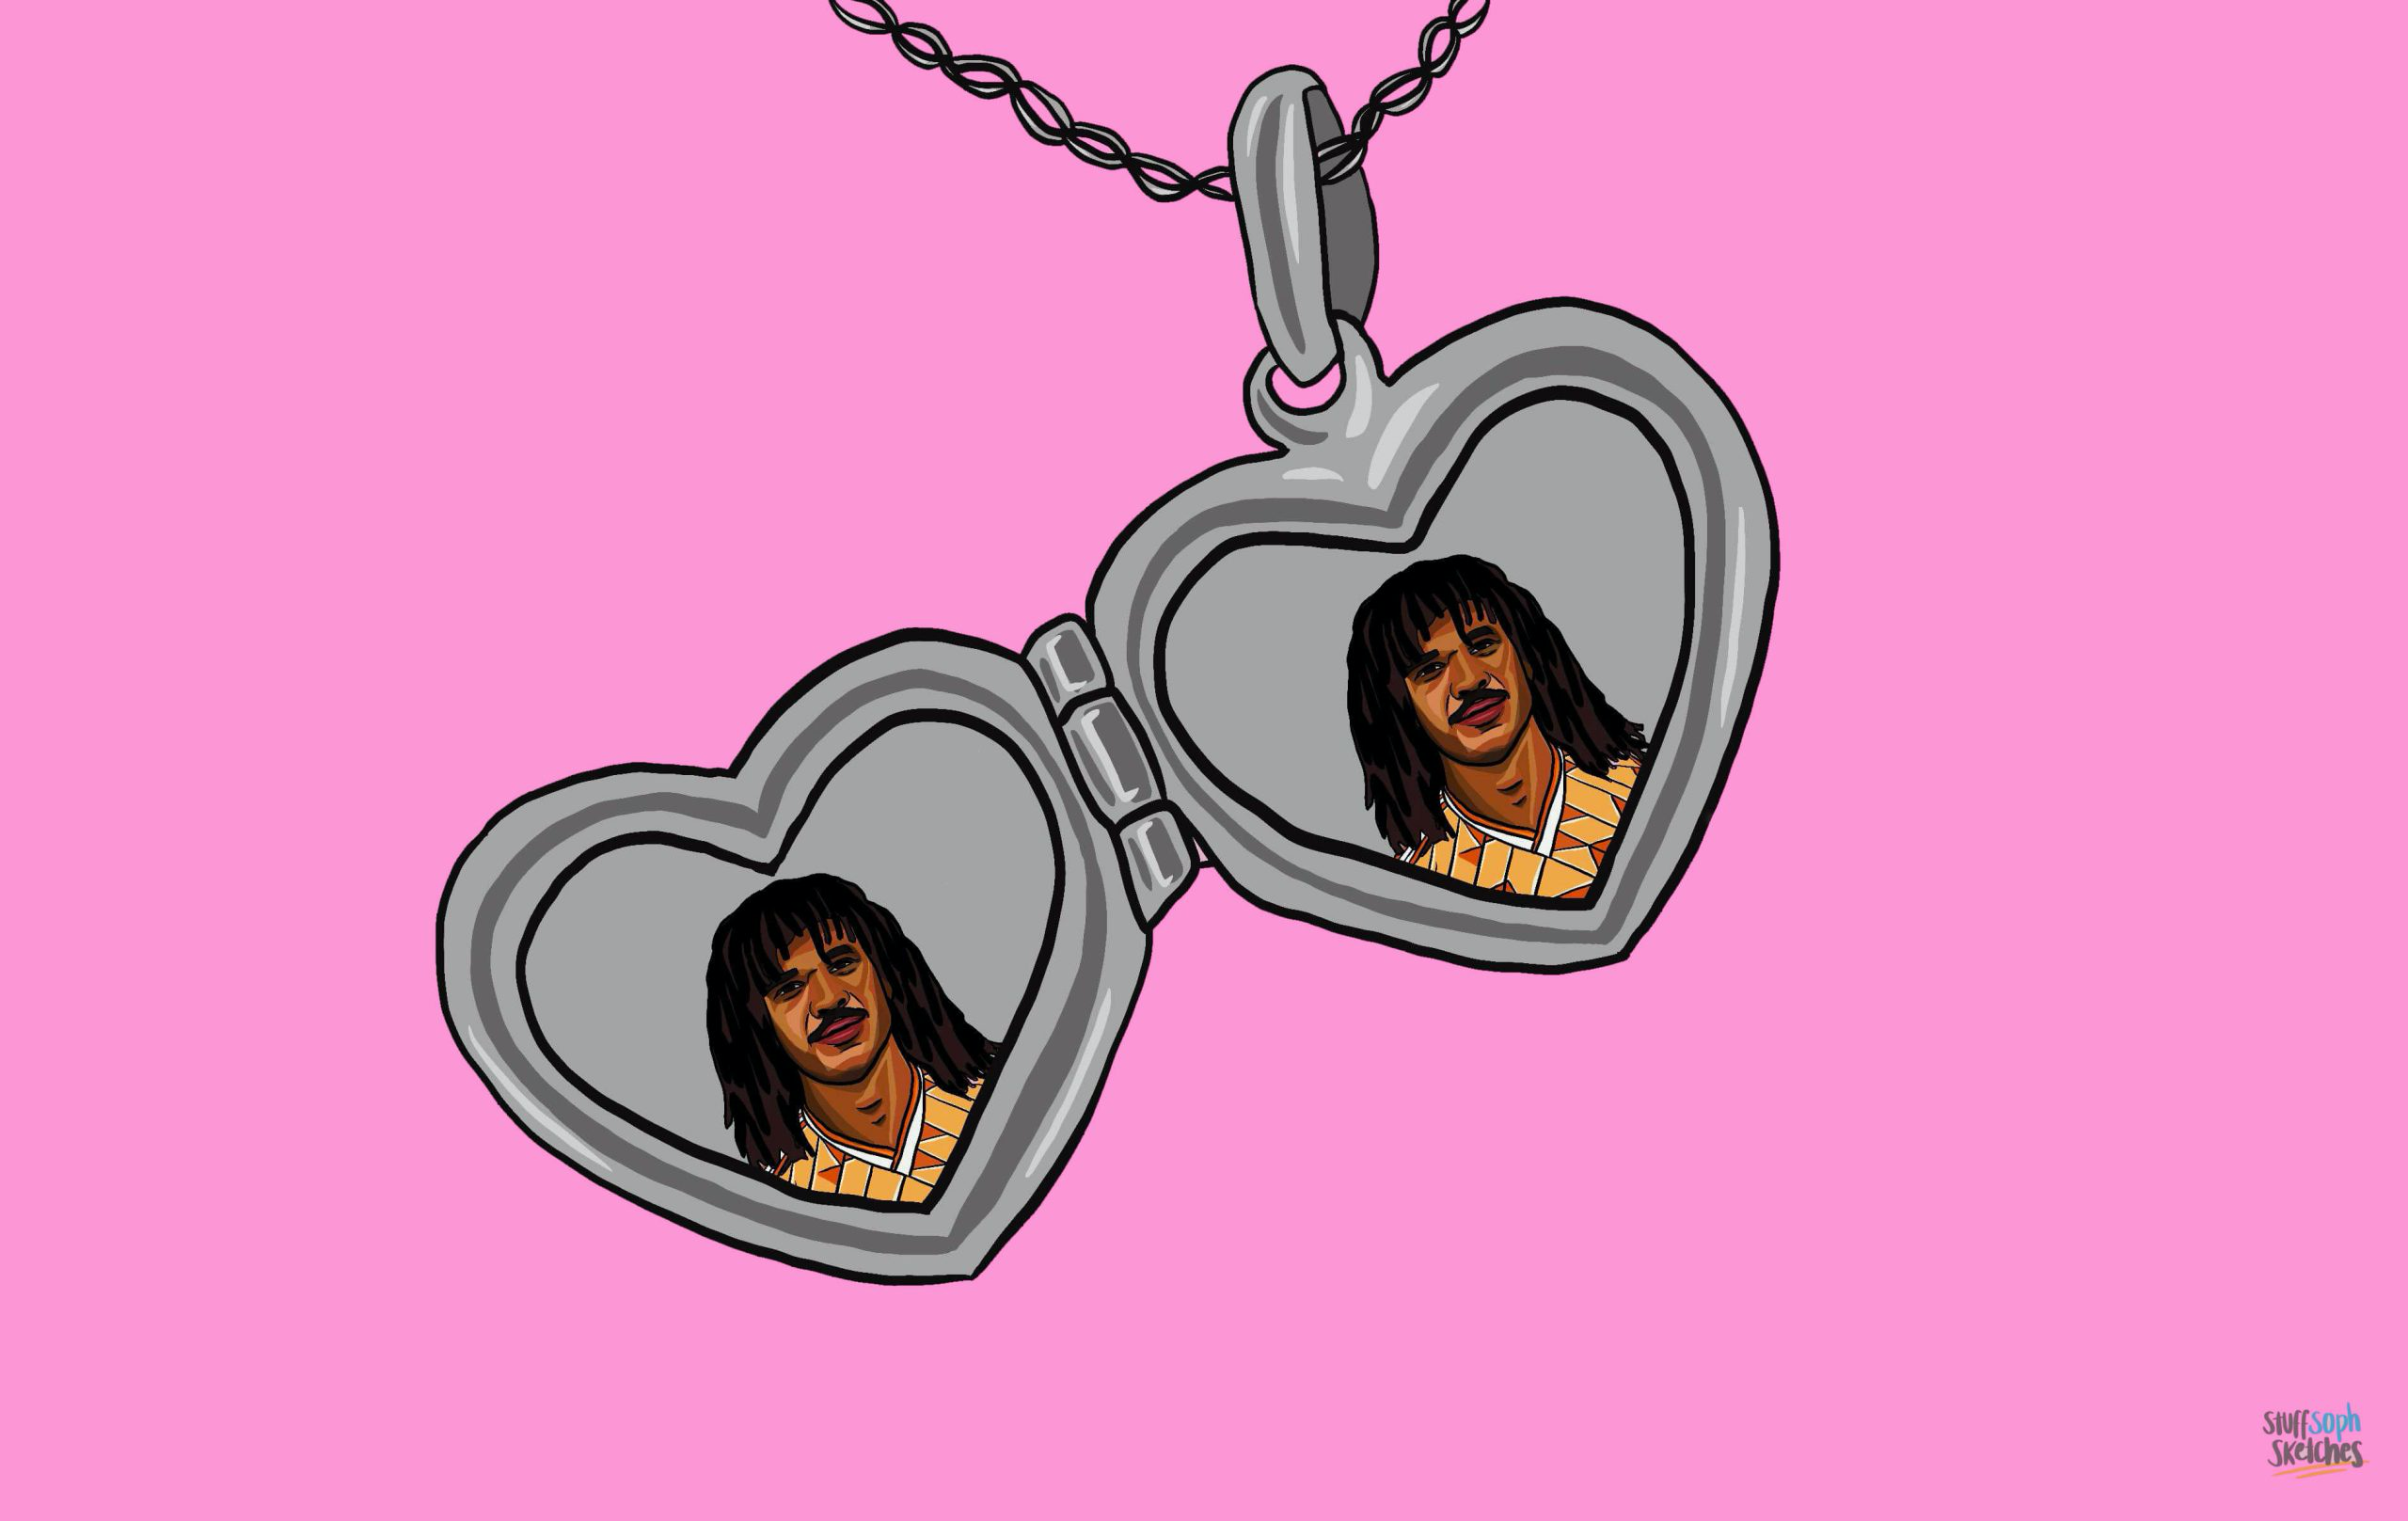 Ruud Gullit face on both sides of an open Love Lockett necklace